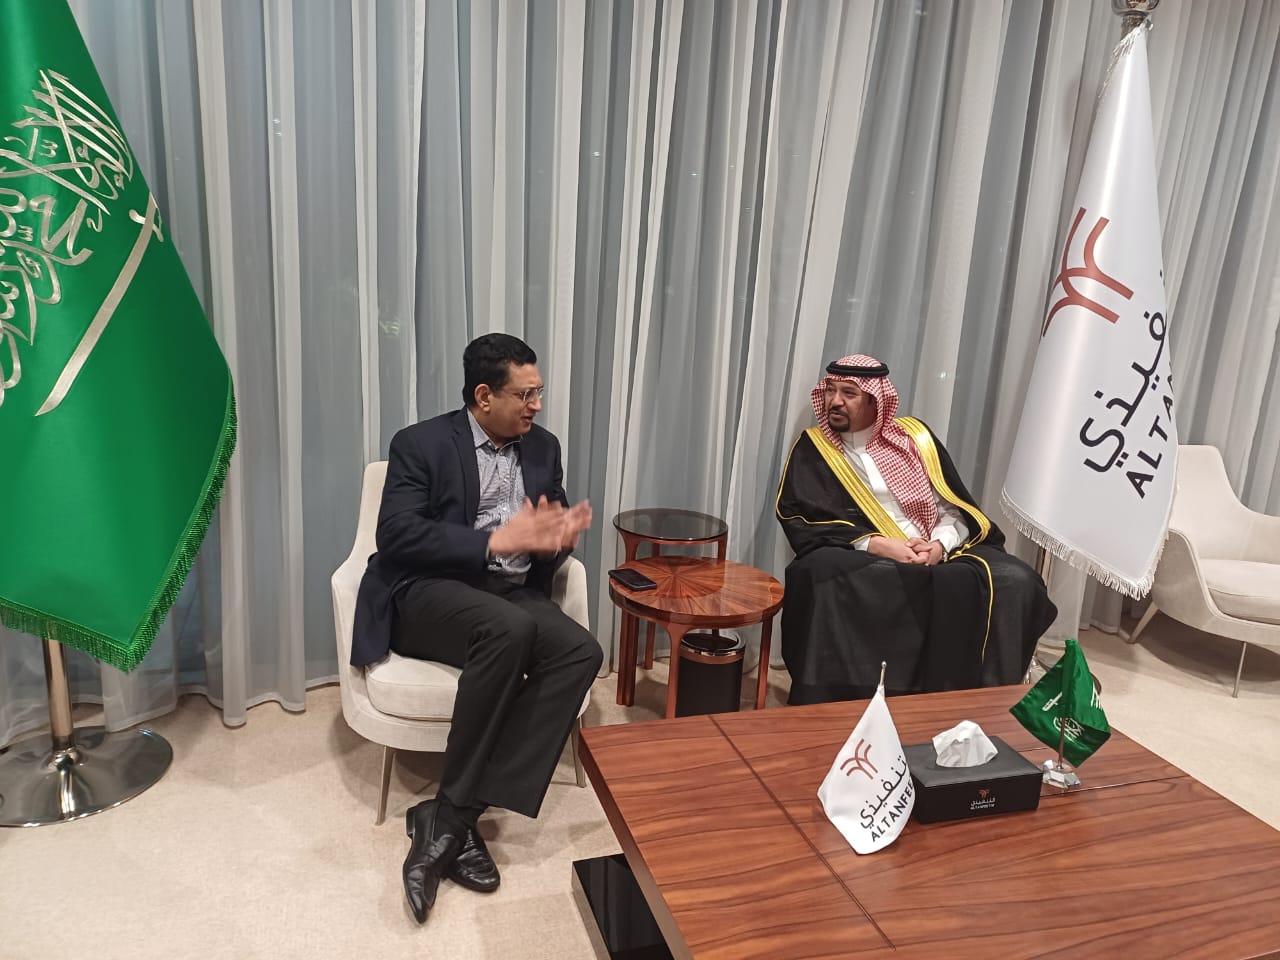 Read more about the article Consul General Falah Alhabshi Mowlana received Hon. Ali Sabry, Minister of Foreign Affairs of Sri Lanka at the Airport – Jeddah.